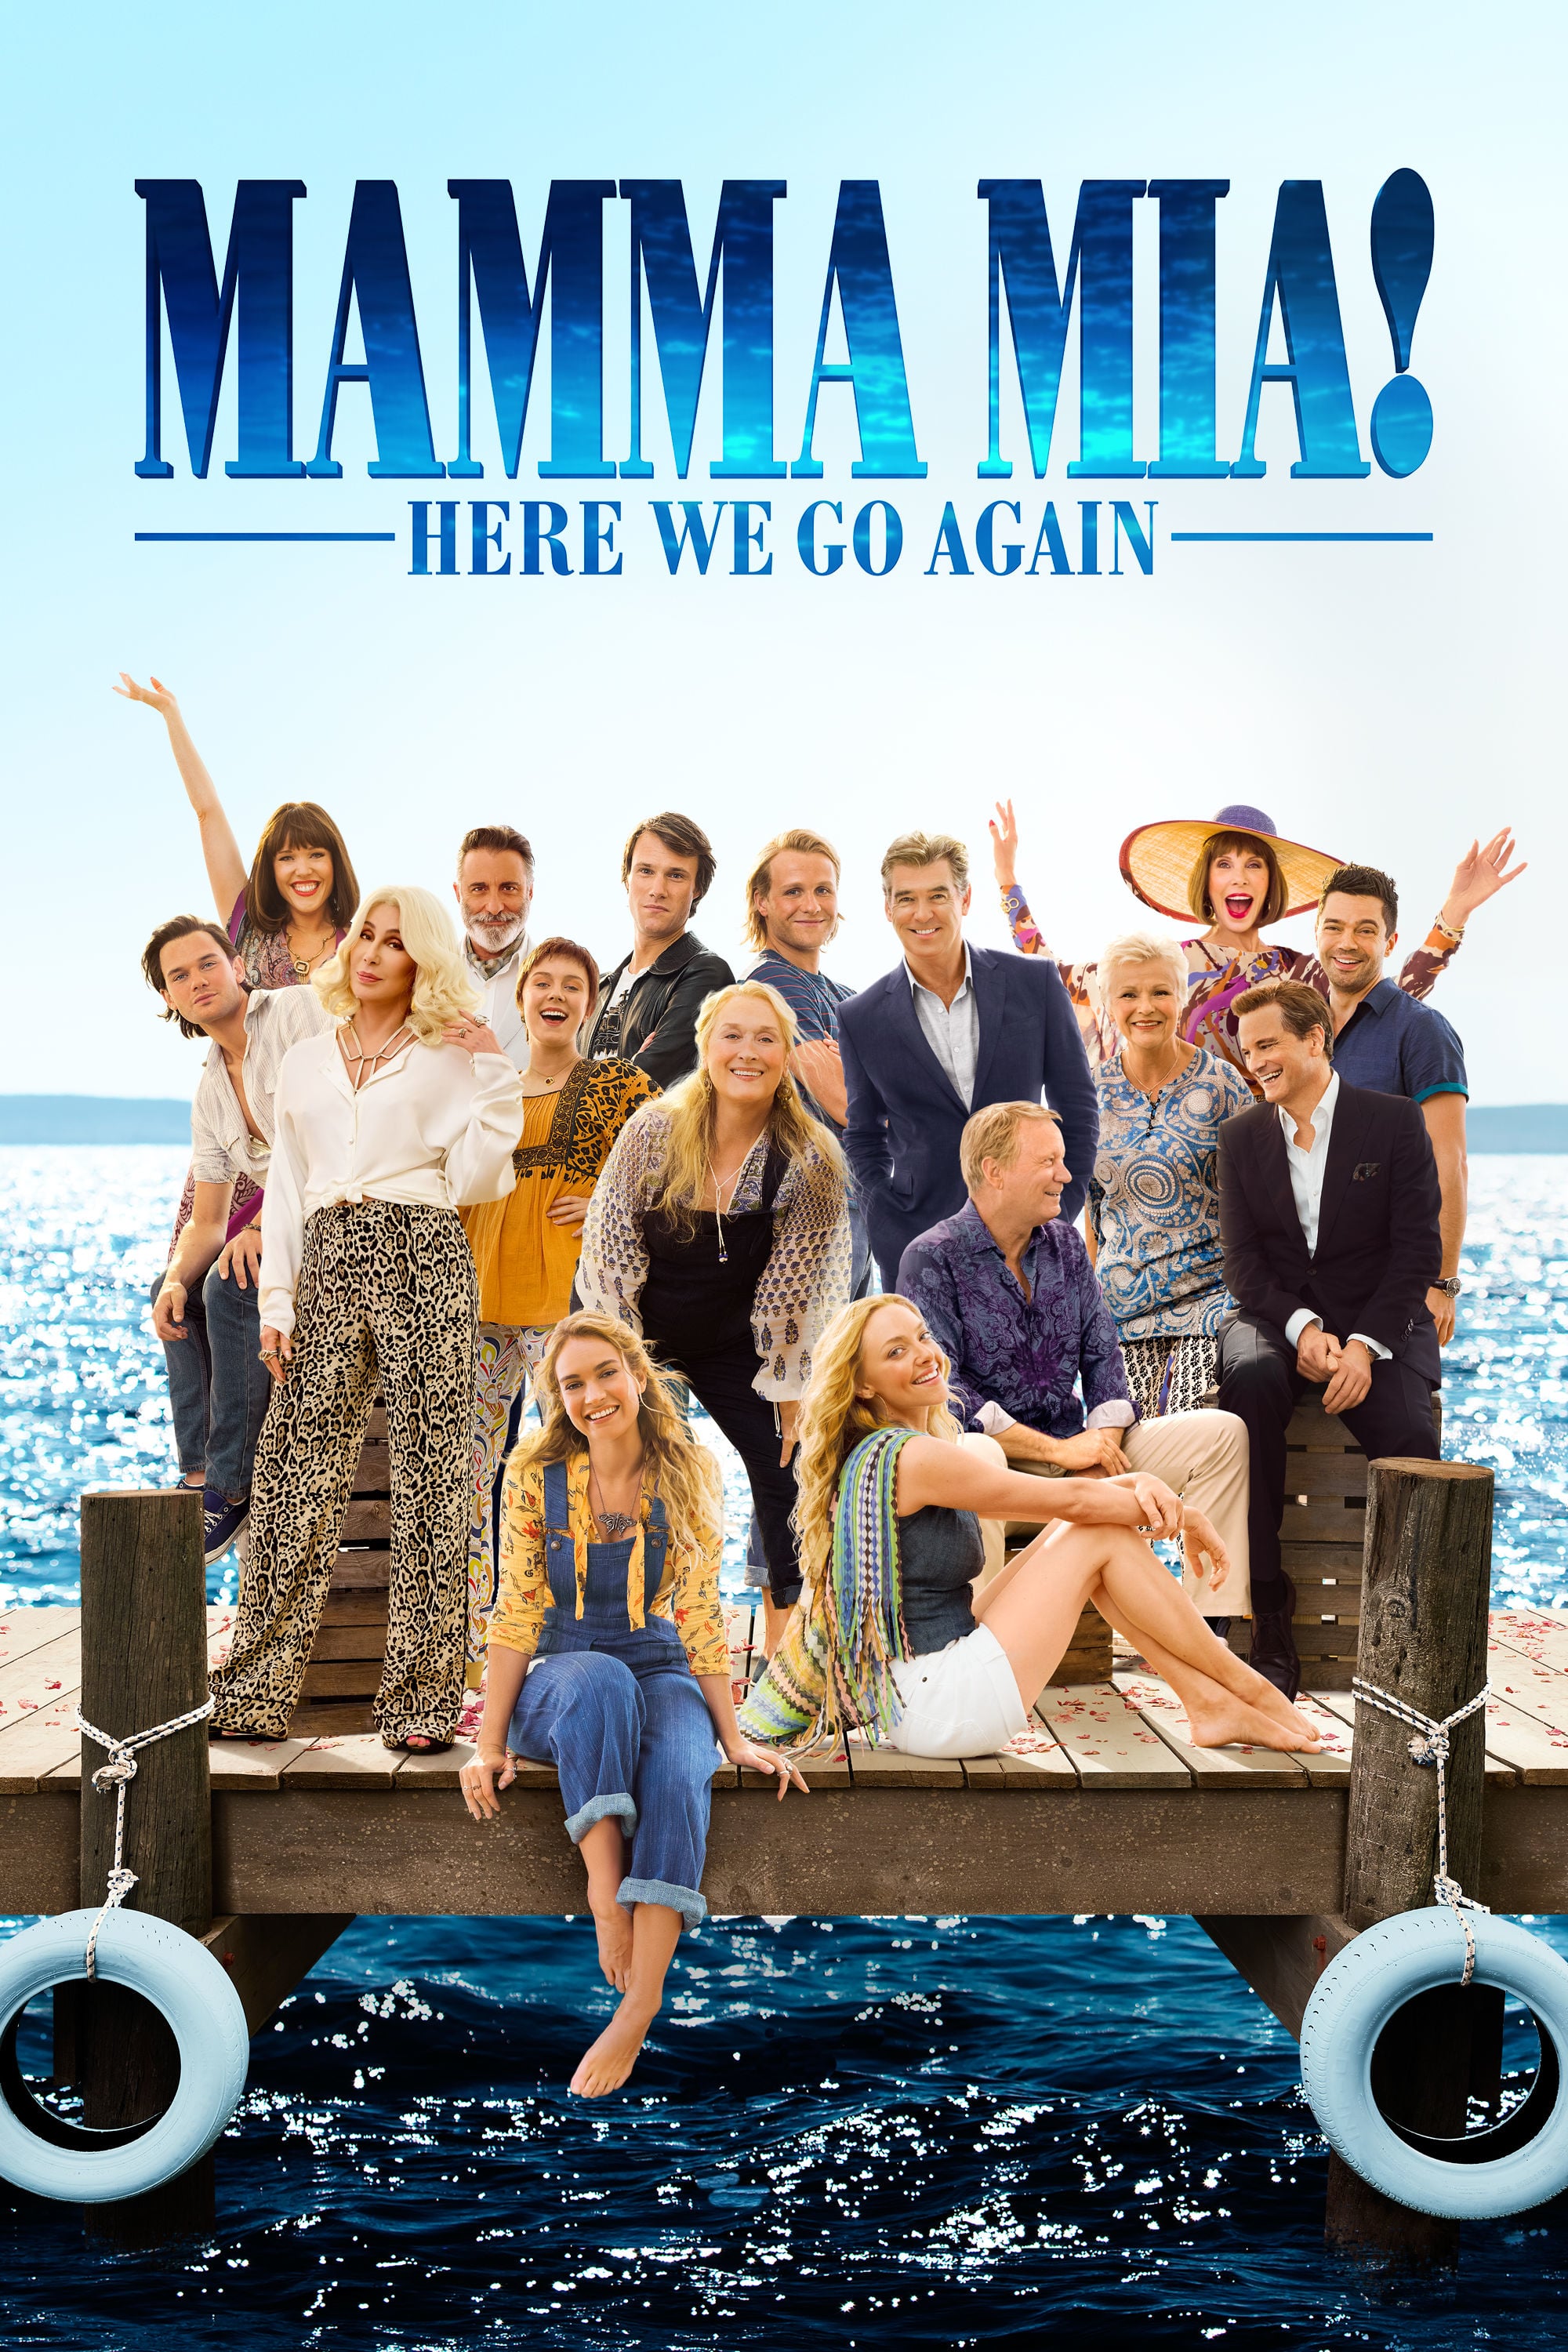 Poster for the movie "Mamma Mia! Here We Go Again"